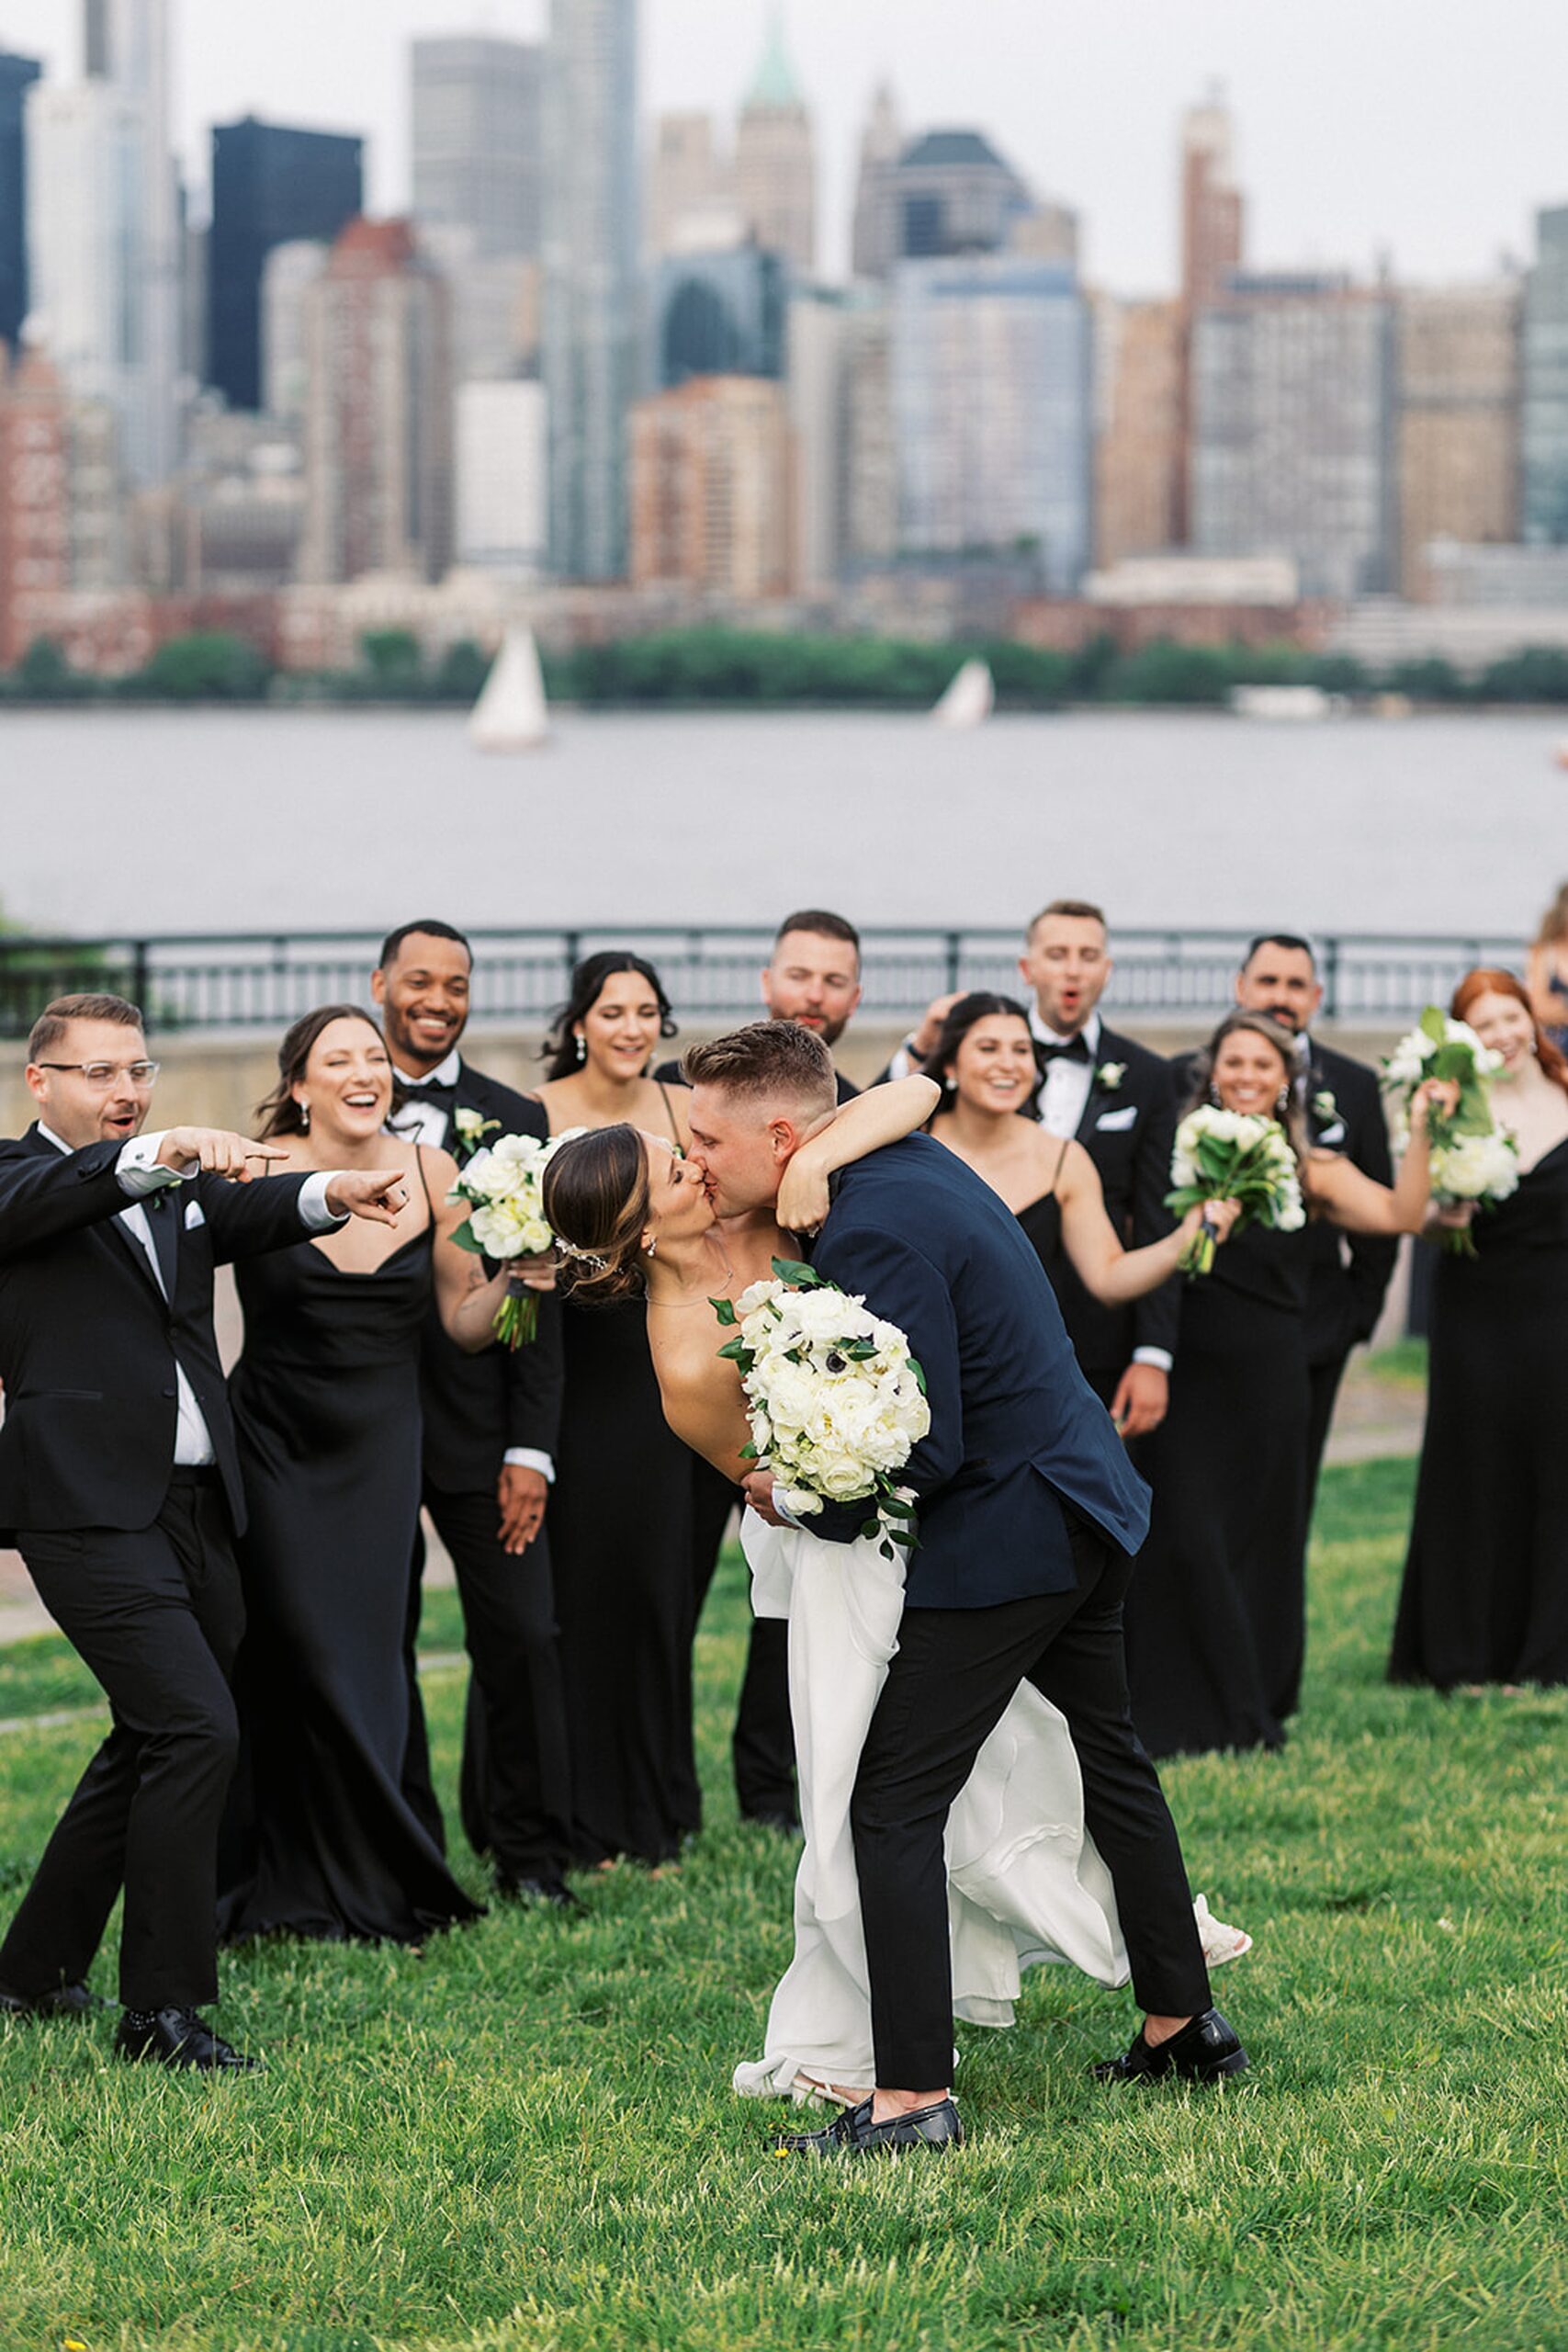 Newlyweds kiss and dip while being cheered for by their large wedding party